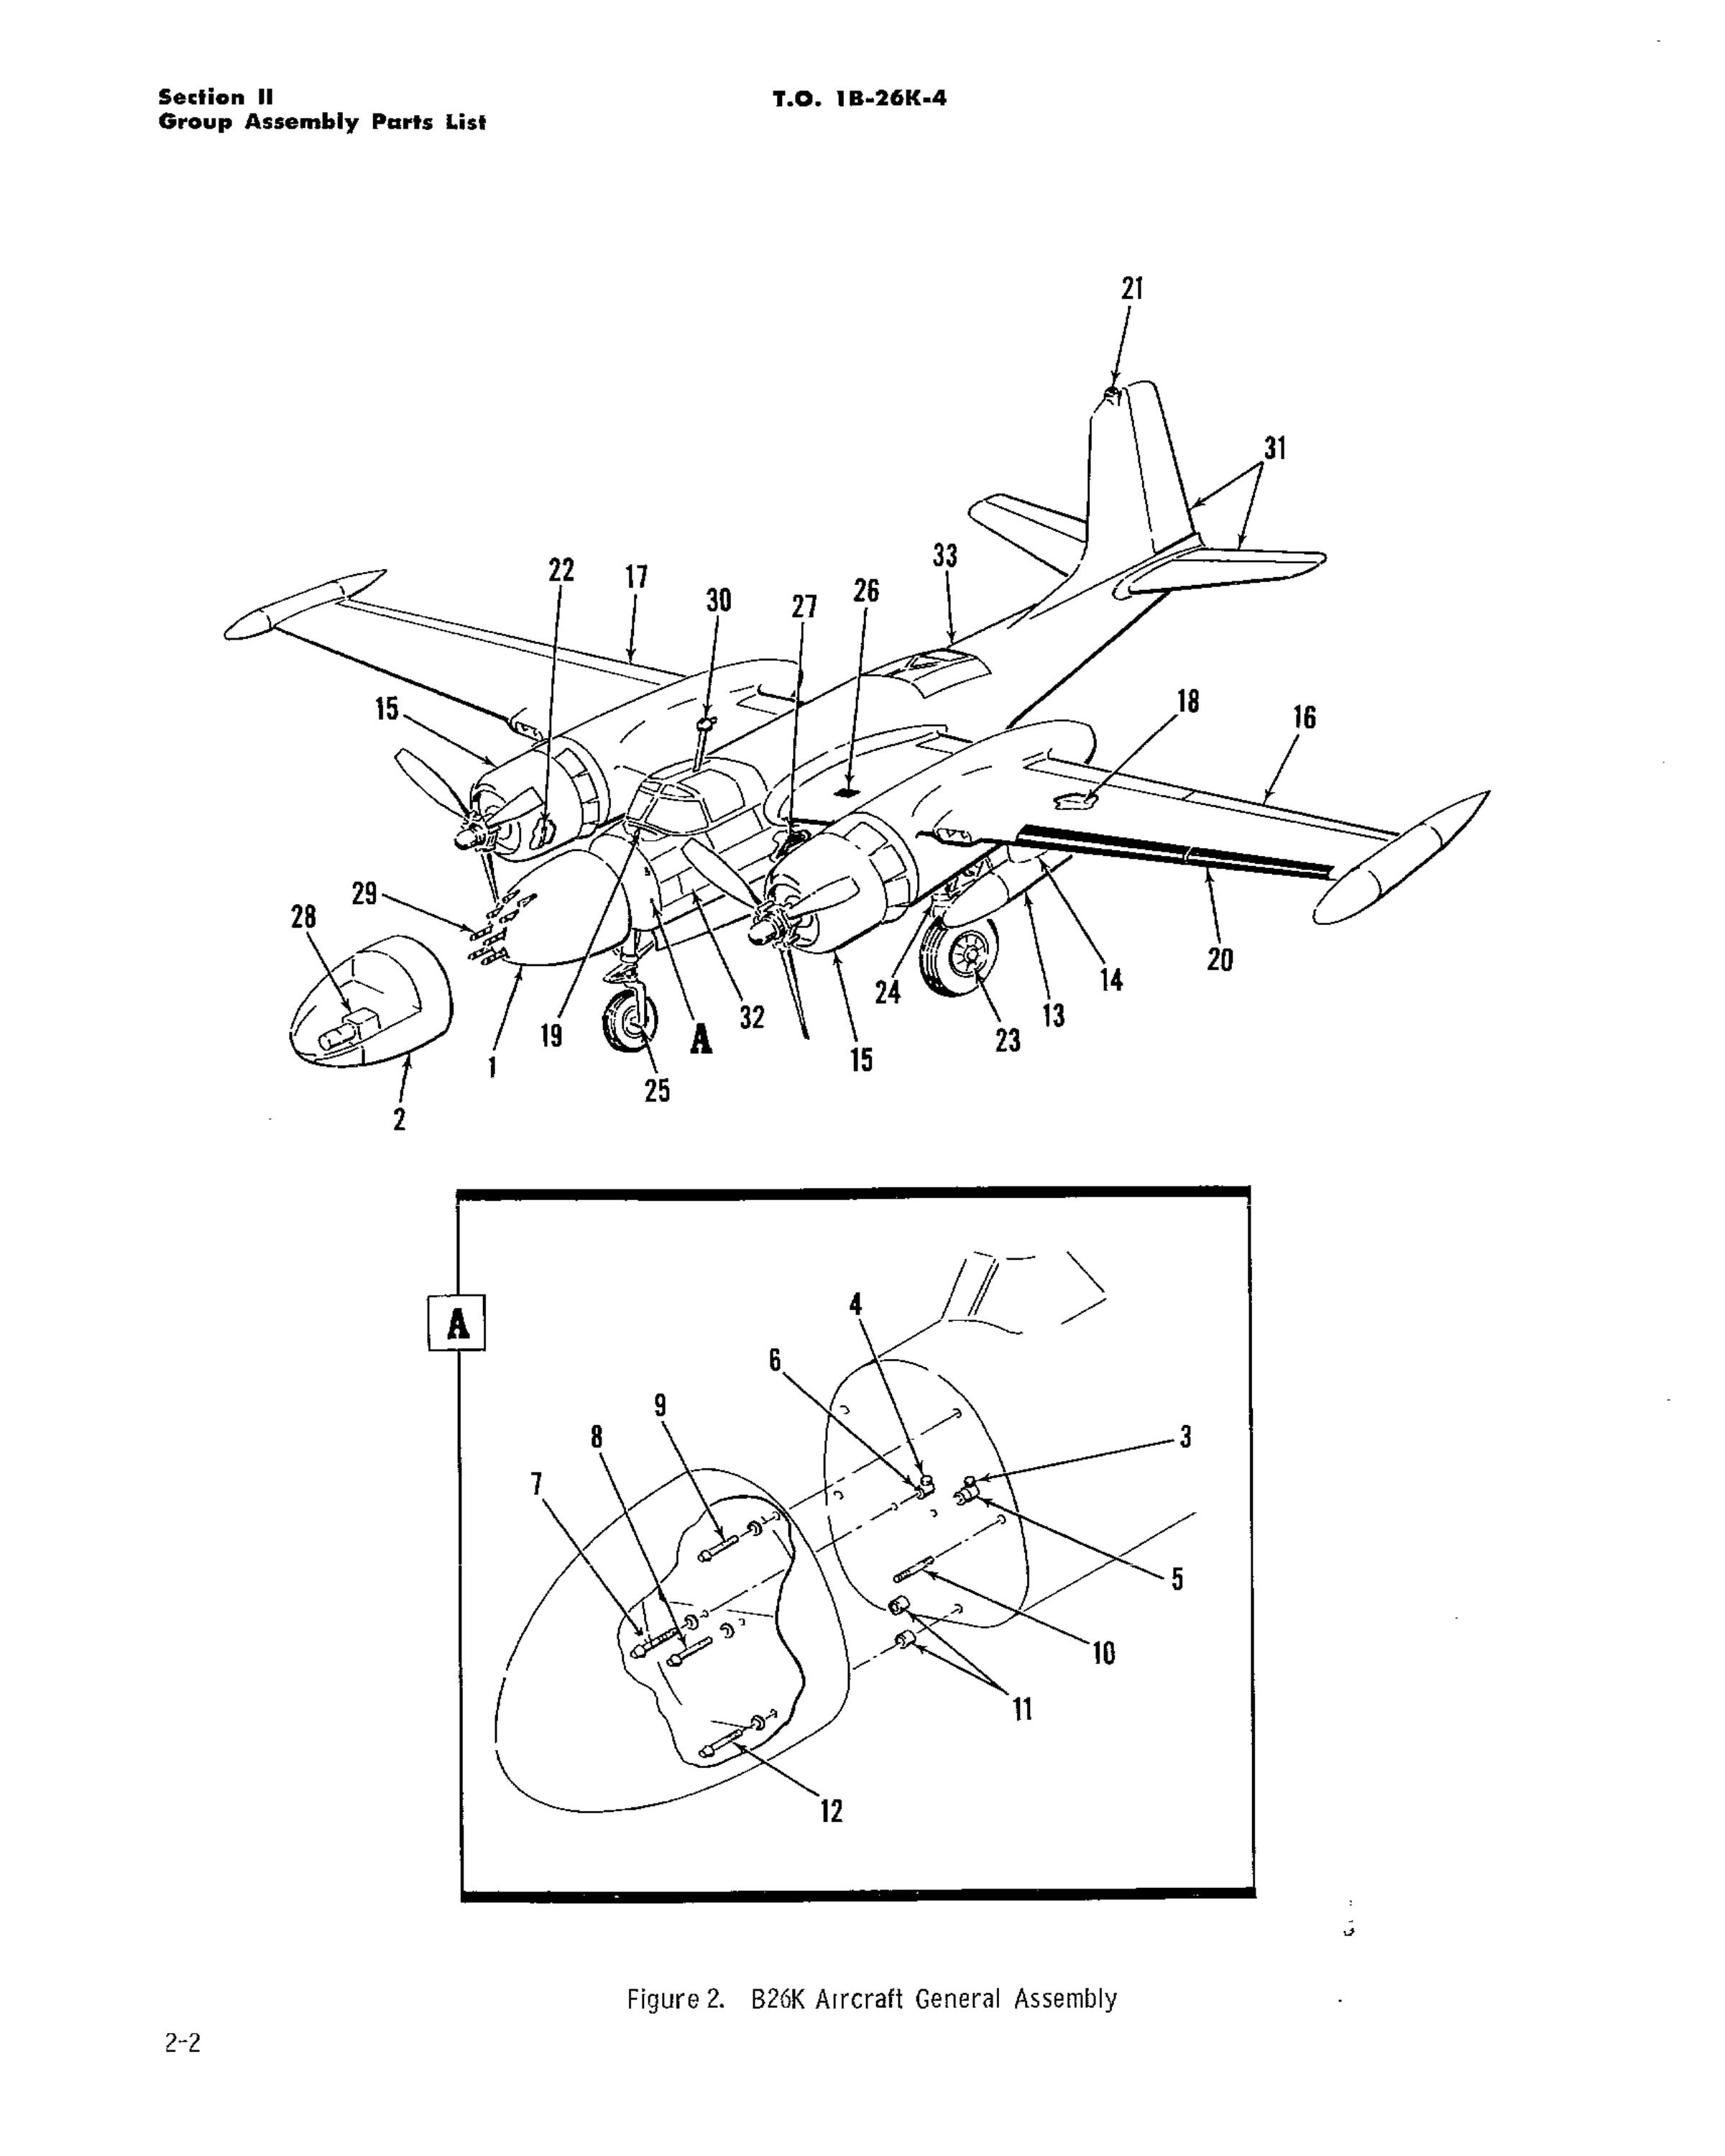 Sample page 20 from AirCorps Library document: Illustrated Parts Breakdown for B-26K Series Aircraft